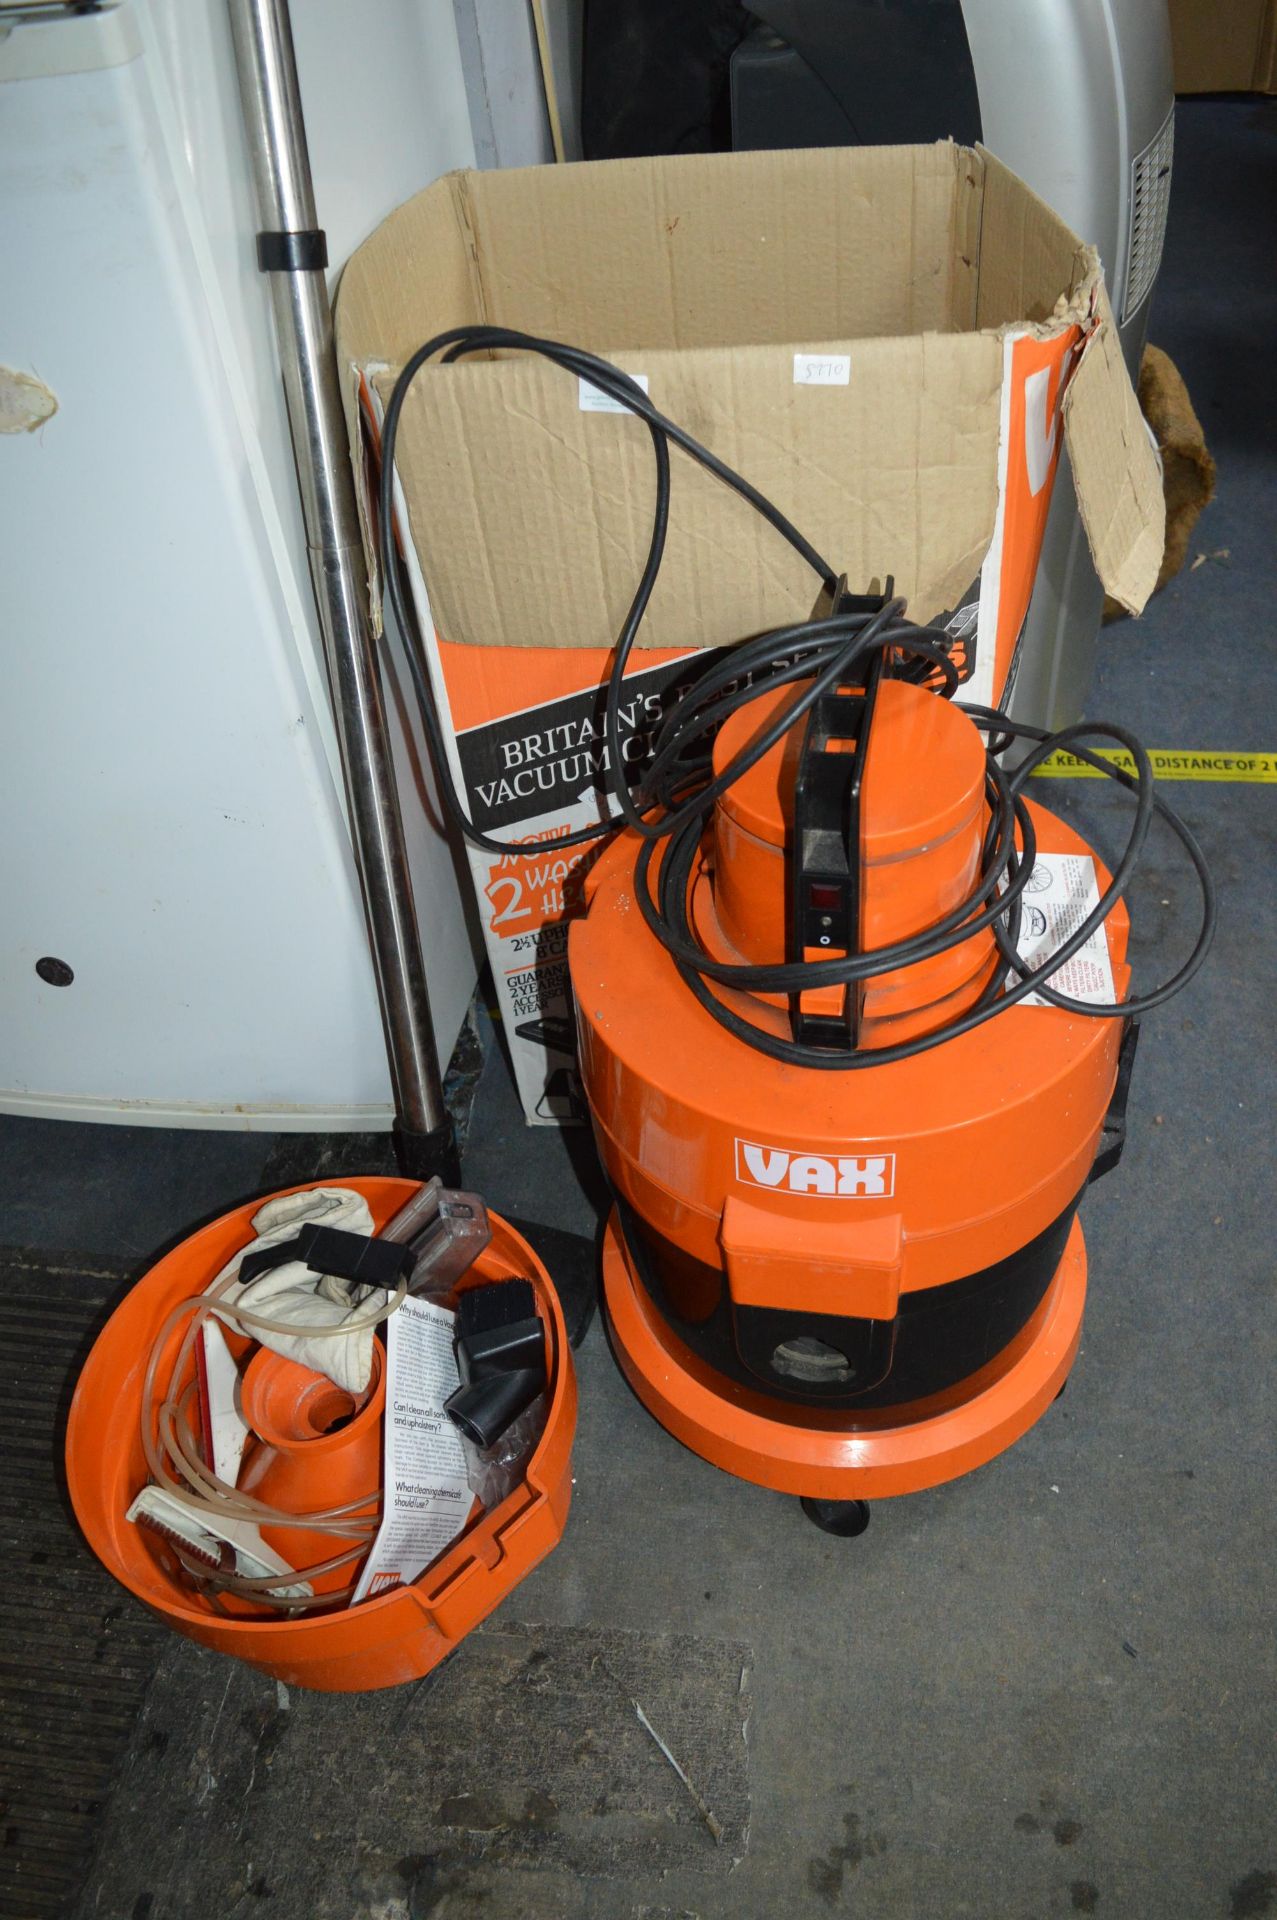 Vax Vacuum Cleaner with Attachments